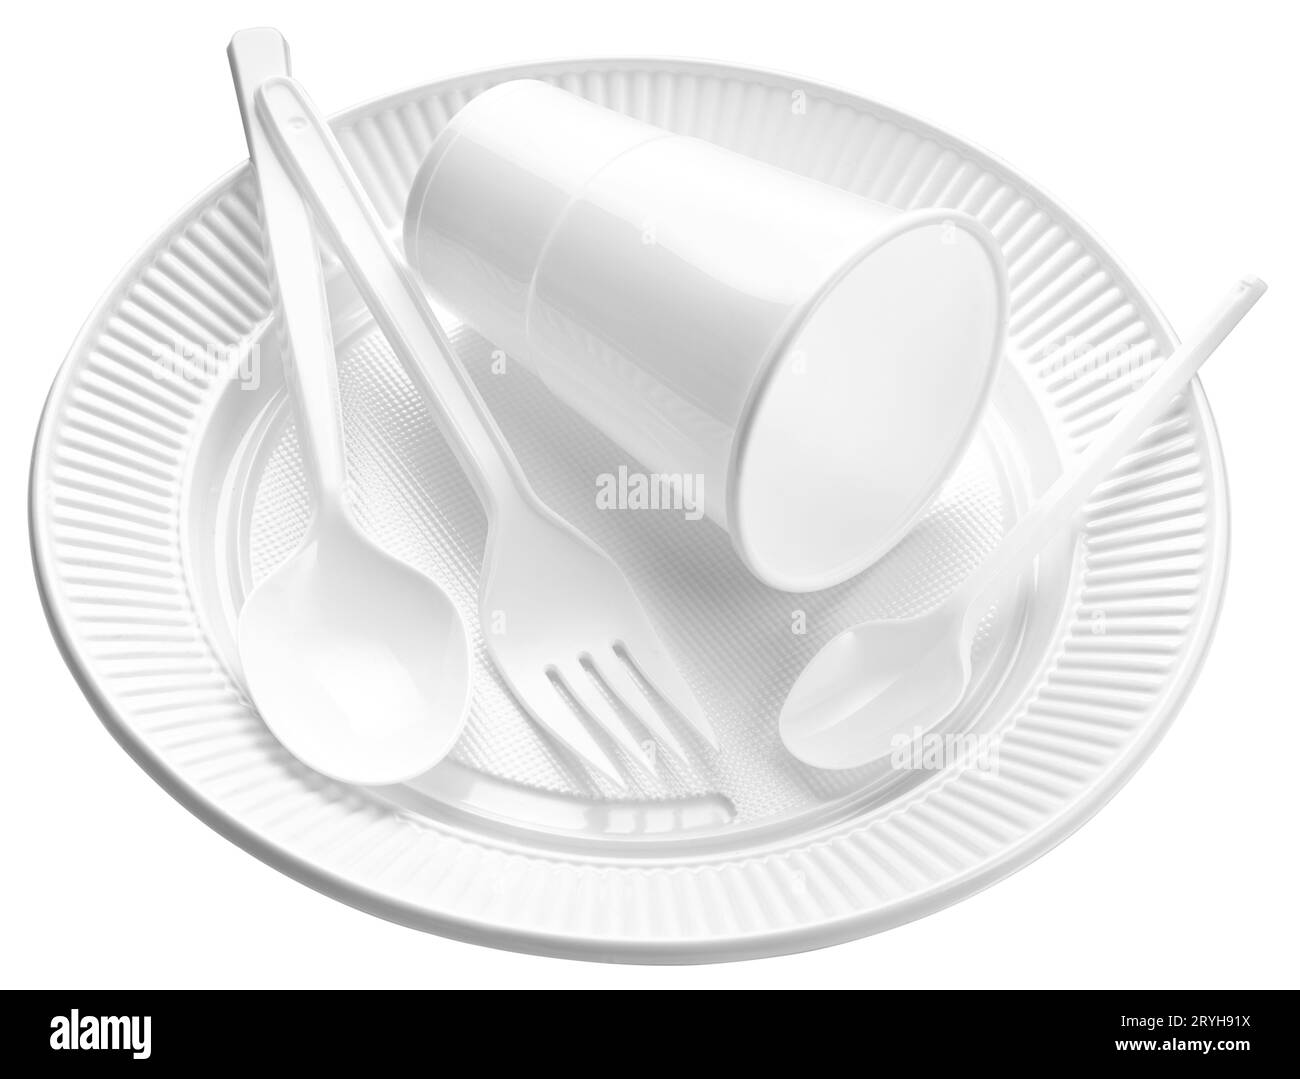 White plastic cup, plate, fork and spoon isolated on white background Disposable Plastic dishware Stock Photo